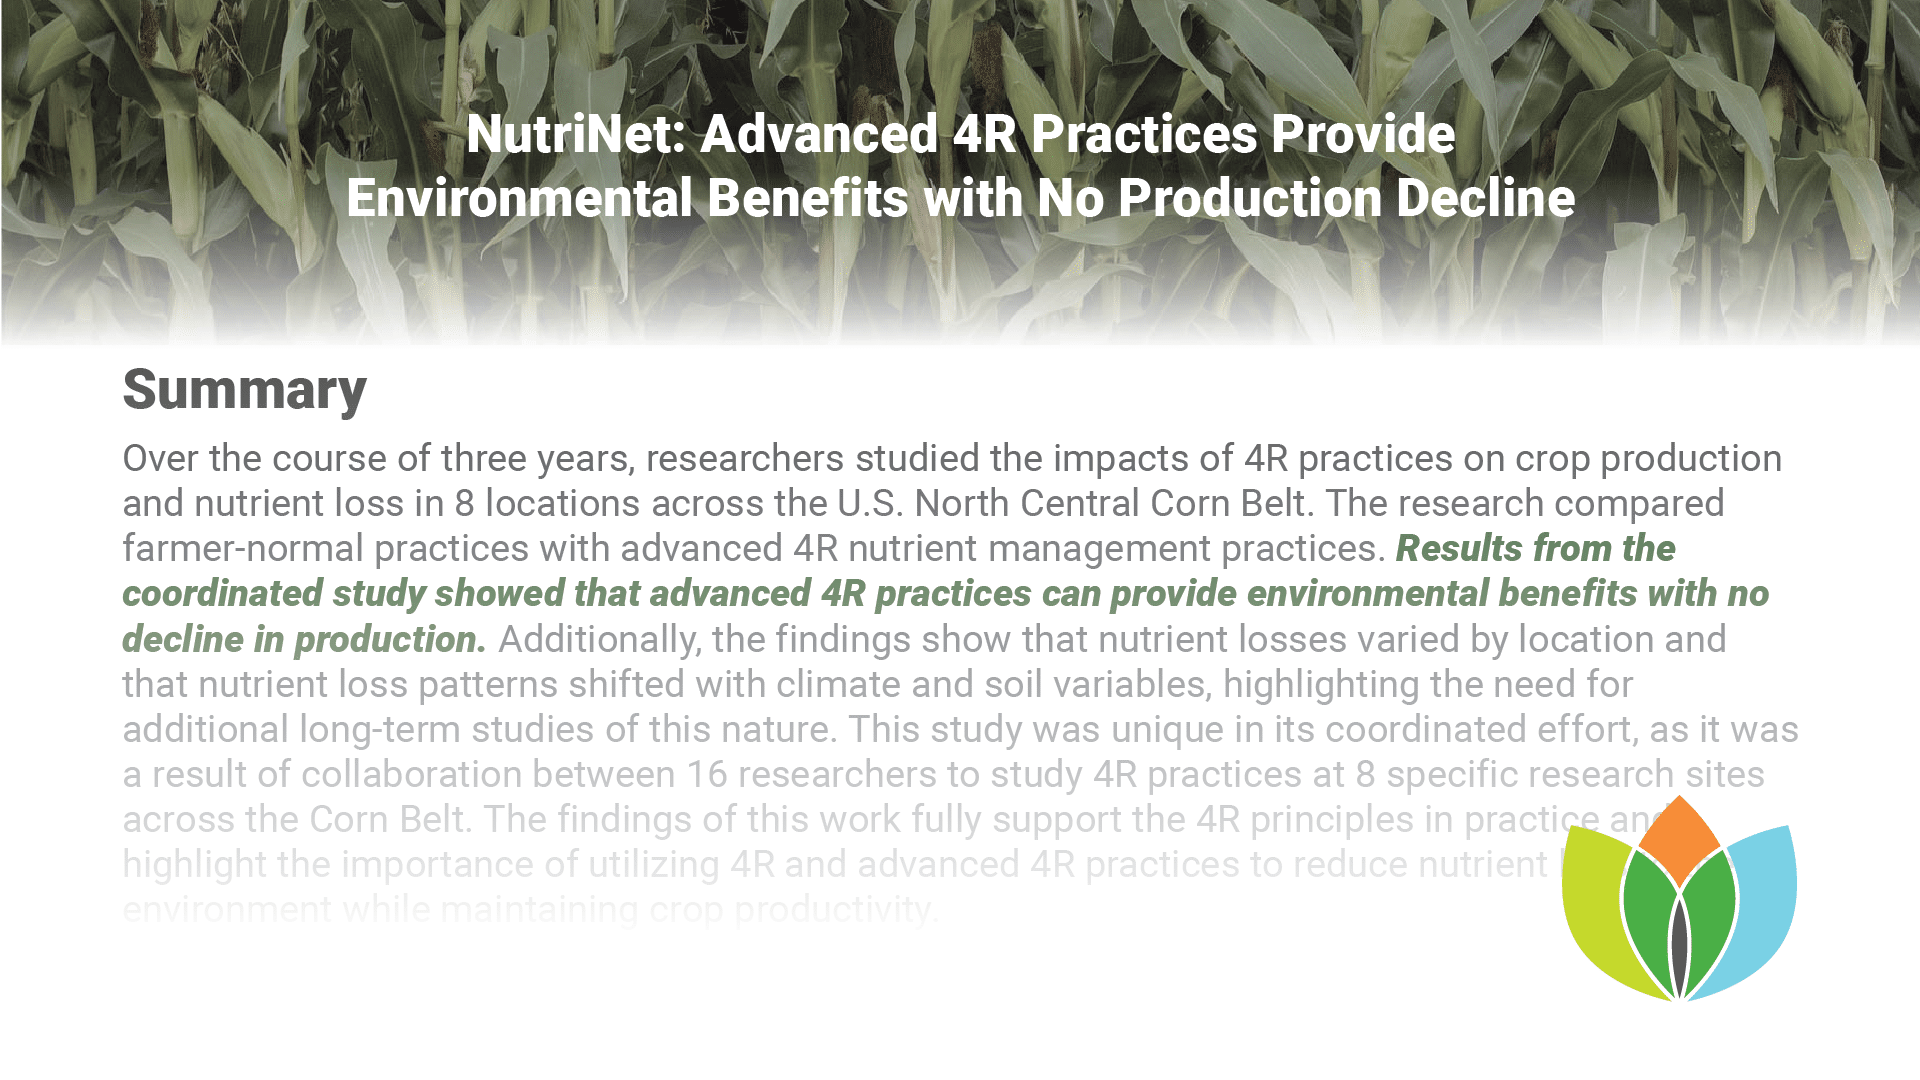 Nutri-Net: Advanced 4R practices provide environmental benefits with no production decline